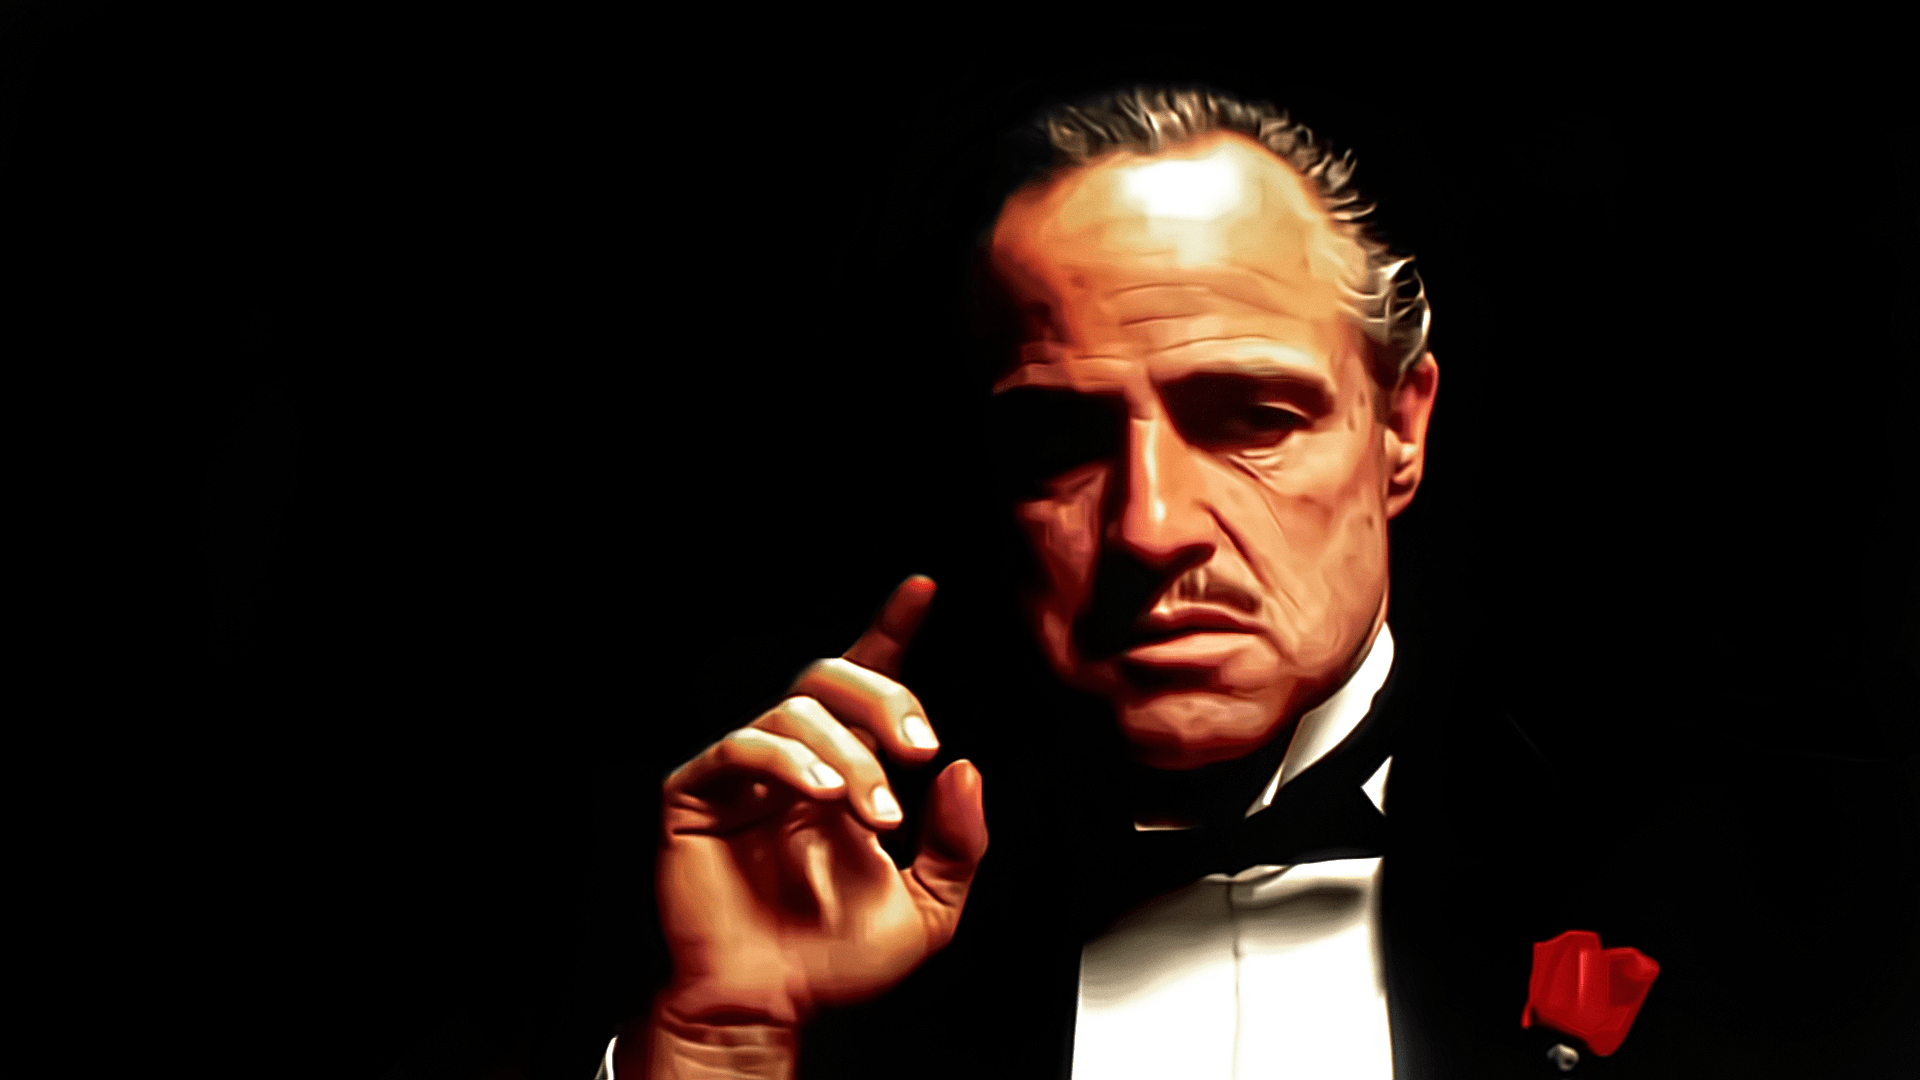 God Father Wallpaper tagged Game Wallpaper. HD